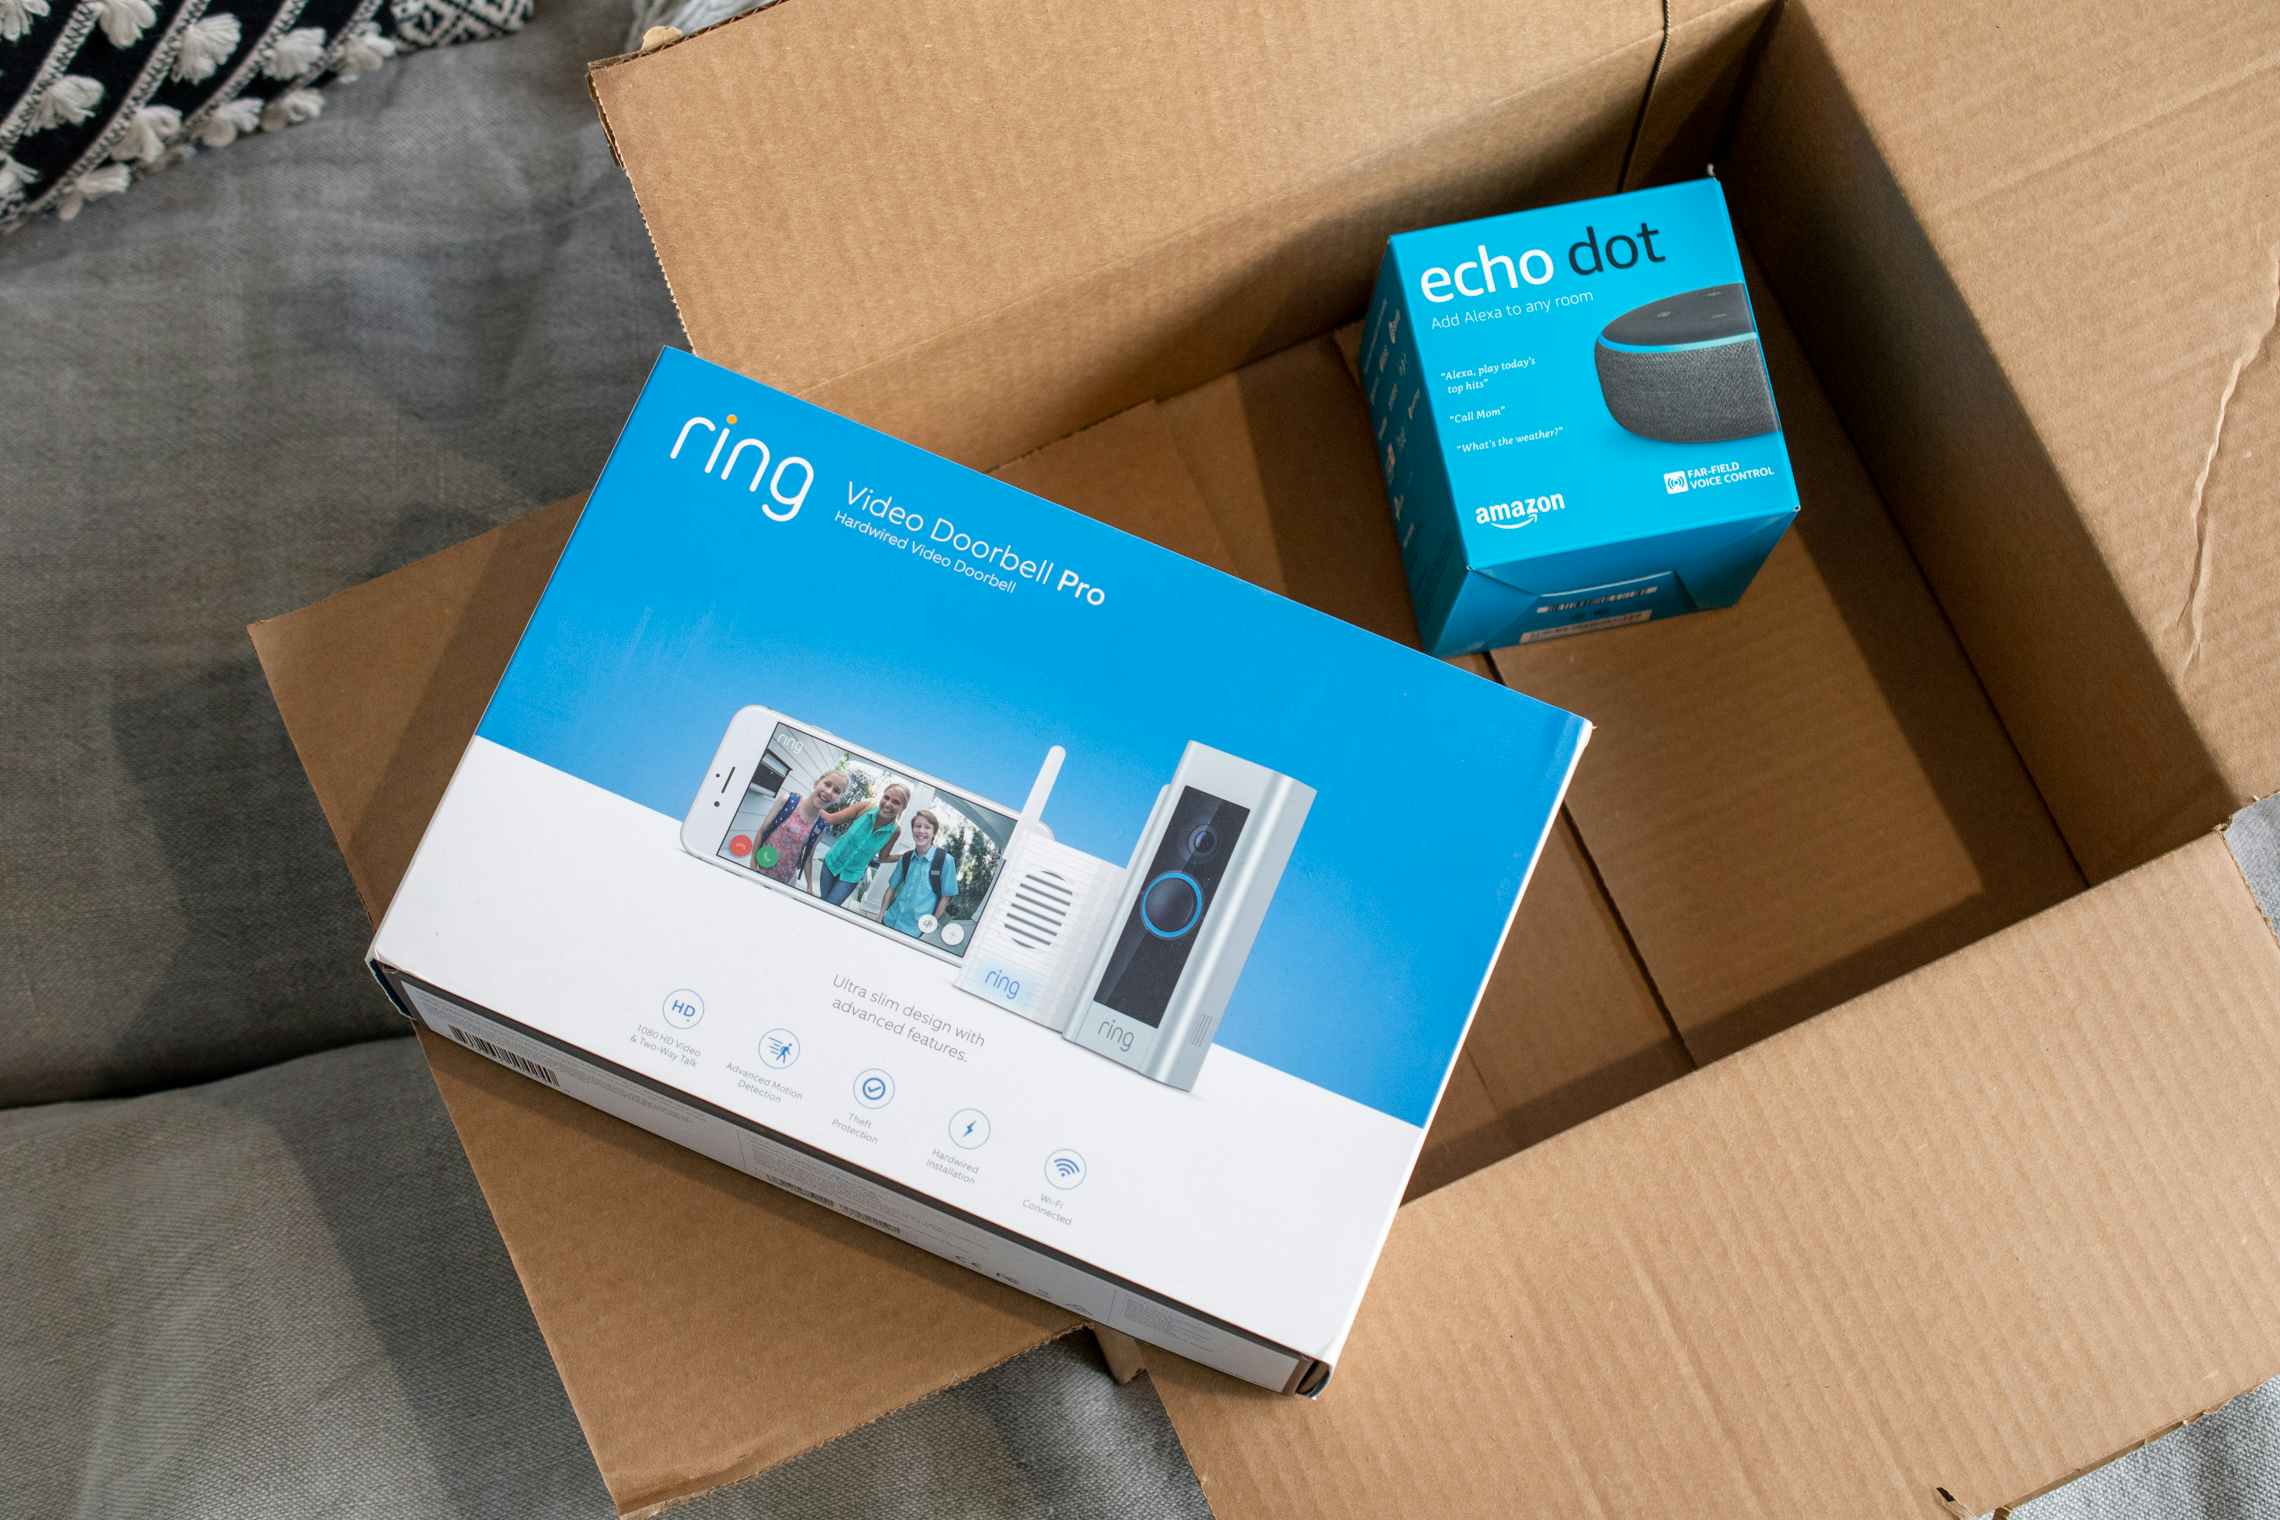 ring doorbell and echo dot outside amazon box 